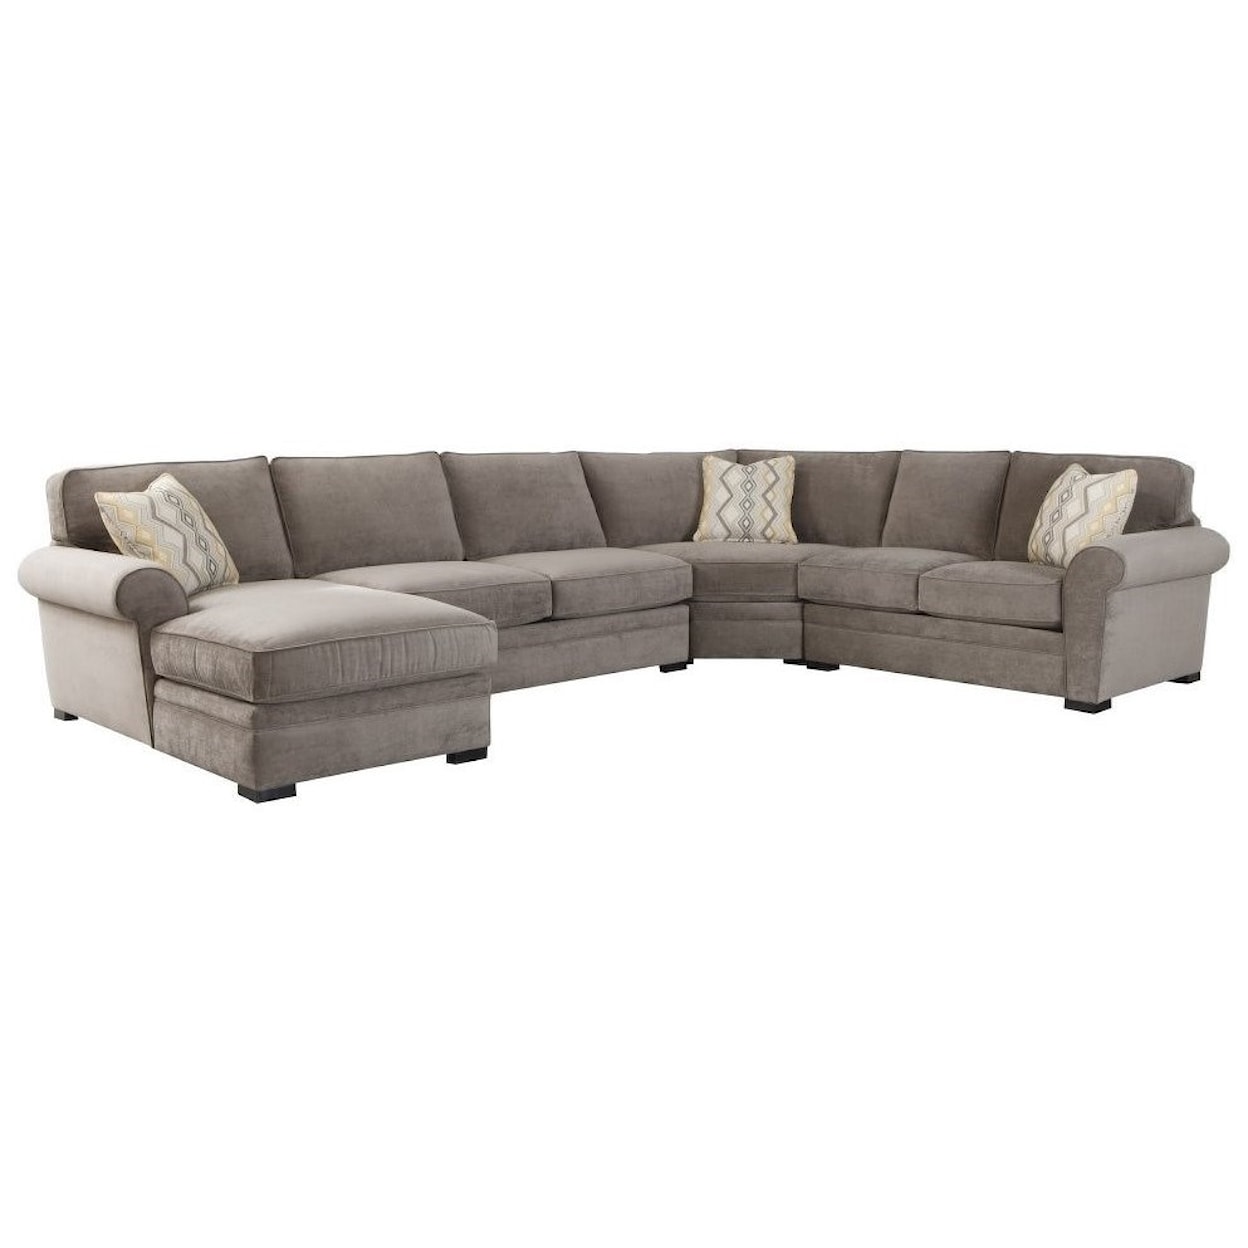 Jonathan Louis Choices - Orion 4-Piece Chaise Sectional